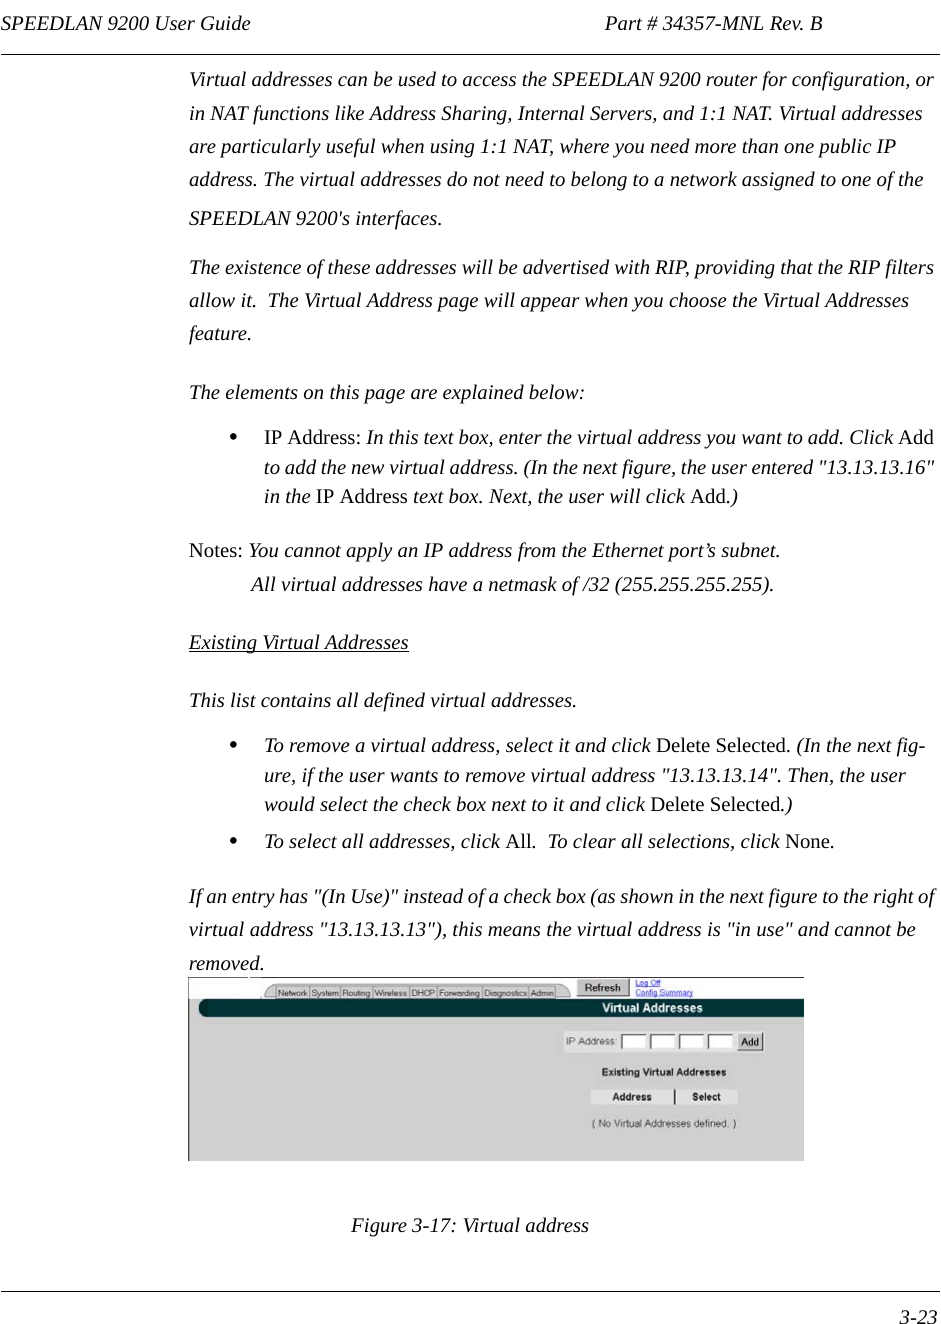 SPEEDLAN 9200 User Guide                                                                    Part # 34357-MNL Rev. B      3-23                                                                                                                                                              Virtual addresses can be used to access the SPEEDLAN 9200 router for configuration, or in NAT functions like Address Sharing, Internal Servers, and 1:1 NAT. Virtual addresses are particularly useful when using 1:1 NAT, where you need more than one public IP address. The virtual addresses do not need to belong to a network assigned to one of the SPEEDLAN 9200&apos;s interfaces.  The existence of these addresses will be advertised with RIP, providing that the RIP filters allow it.  The Virtual Address page will appear when you choose the Virtual Addresses feature. The elements on this page are explained below:•IP Address: In this text box, enter the virtual address you want to add. Click Add to add the new virtual address. (In the next figure, the user entered &quot;13.13.13.16&quot; in the IP Address text box. Next, the user will click Add.)Notes: You cannot apply an IP address from the Ethernet port’s subnet.             All virtual addresses have a netmask of /32 (255.255.255.255).Existing Virtual AddressesThis list contains all defined virtual addresses.•To remove a virtual address, select it and click Delete Selected. (In the next fig-ure, if the user wants to remove virtual address &quot;13.13.13.14&quot;. Then, the user would select the check box next to it and click Delete Selected.)•To select all addresses, click All.  To clear all selections, click None. If an entry has &quot;(In Use)&quot; instead of a check box (as shown in the next figure to the right of virtual address &quot;13.13.13.13&quot;), this means the virtual address is &quot;in use&quot; and cannot be removed.   Figure 3-17: Virtual address 